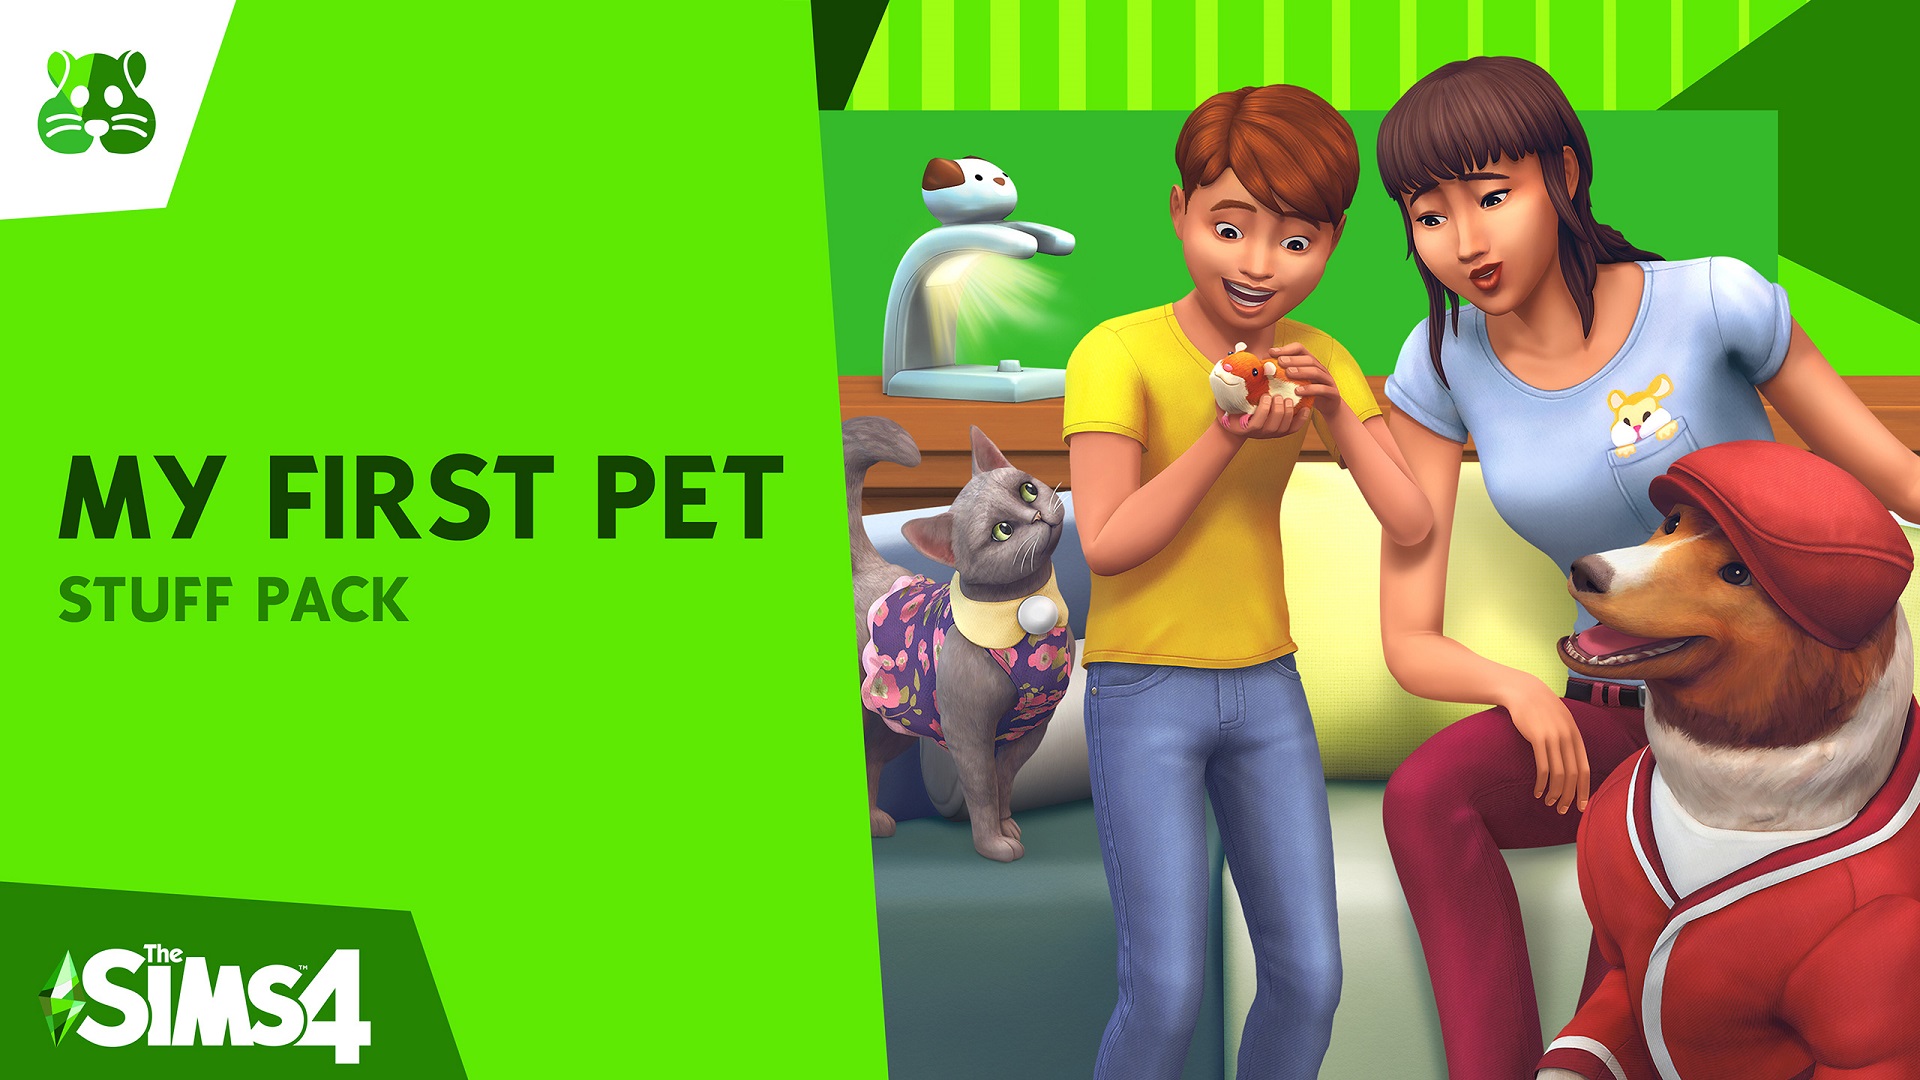 sims 4 game play now for free